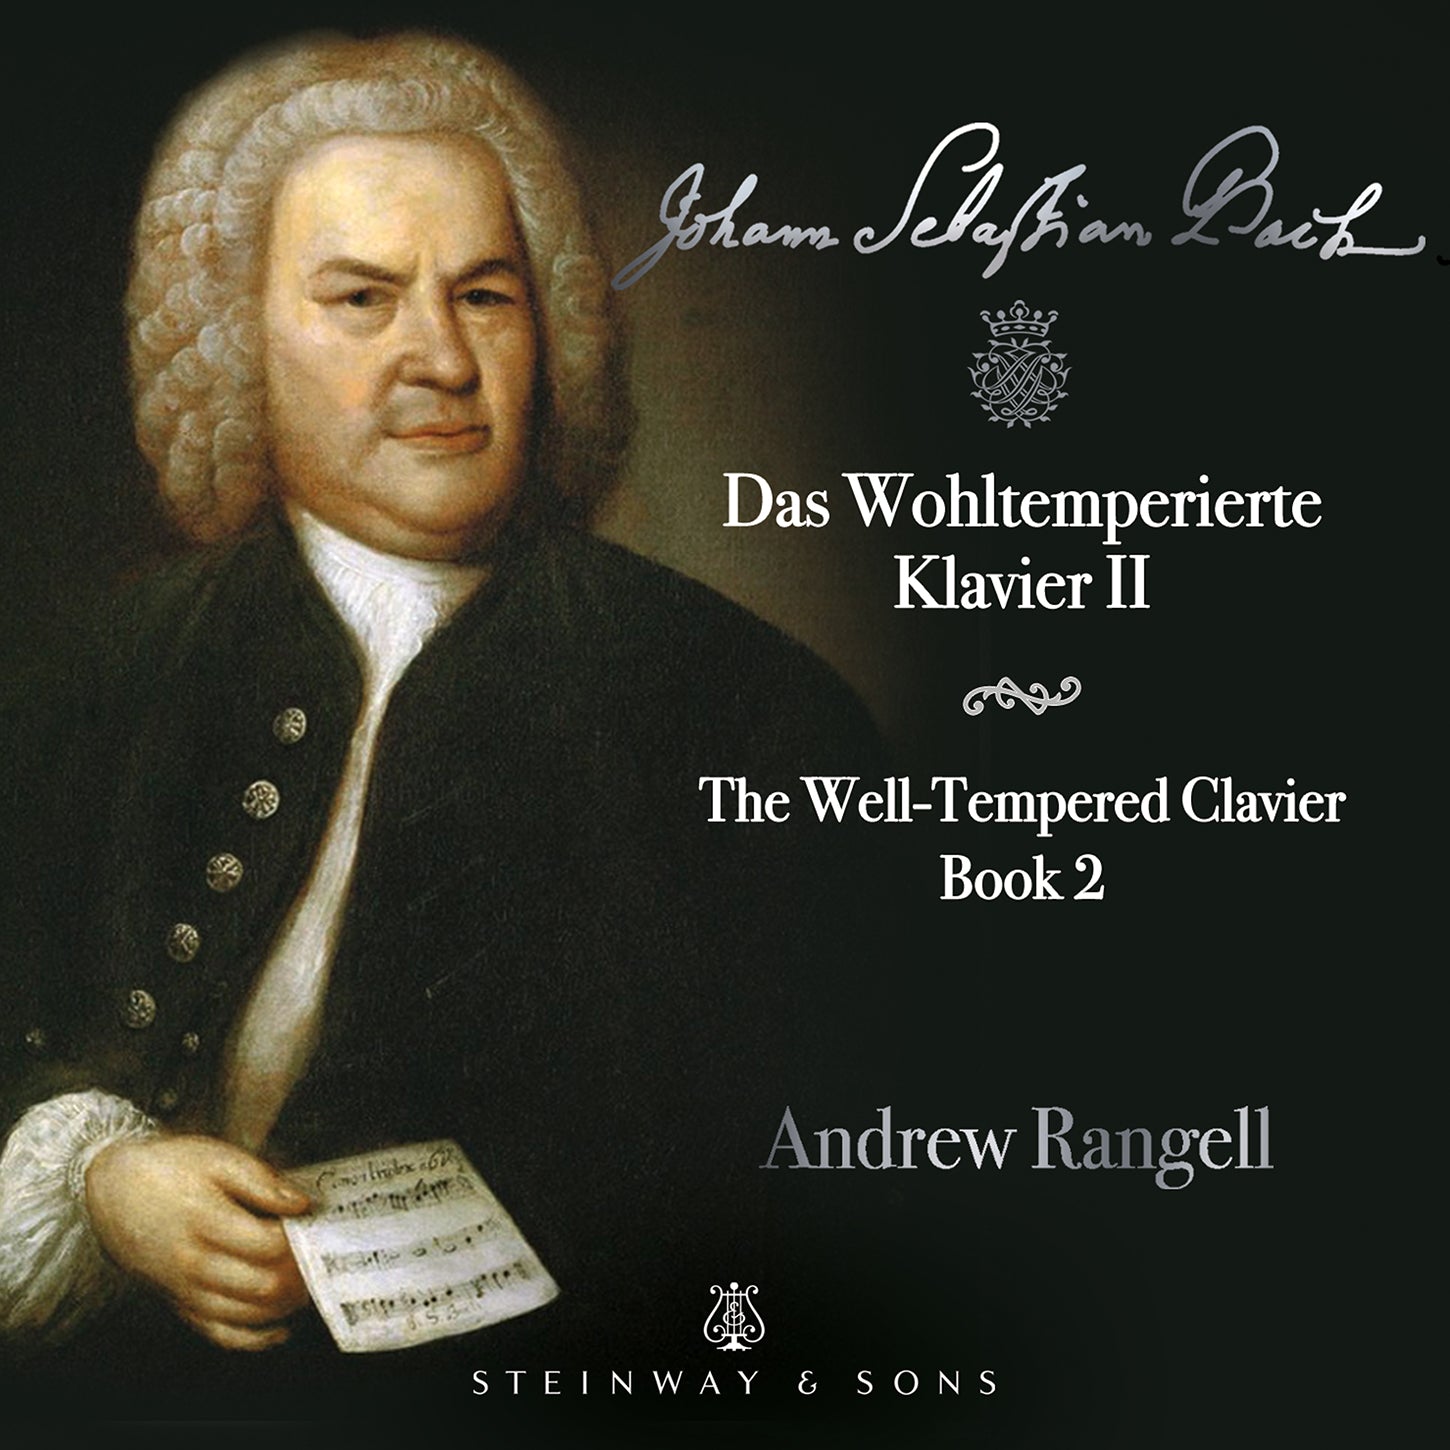 Bach: The Well-Tempered Clavier, Book 2 / Rangell